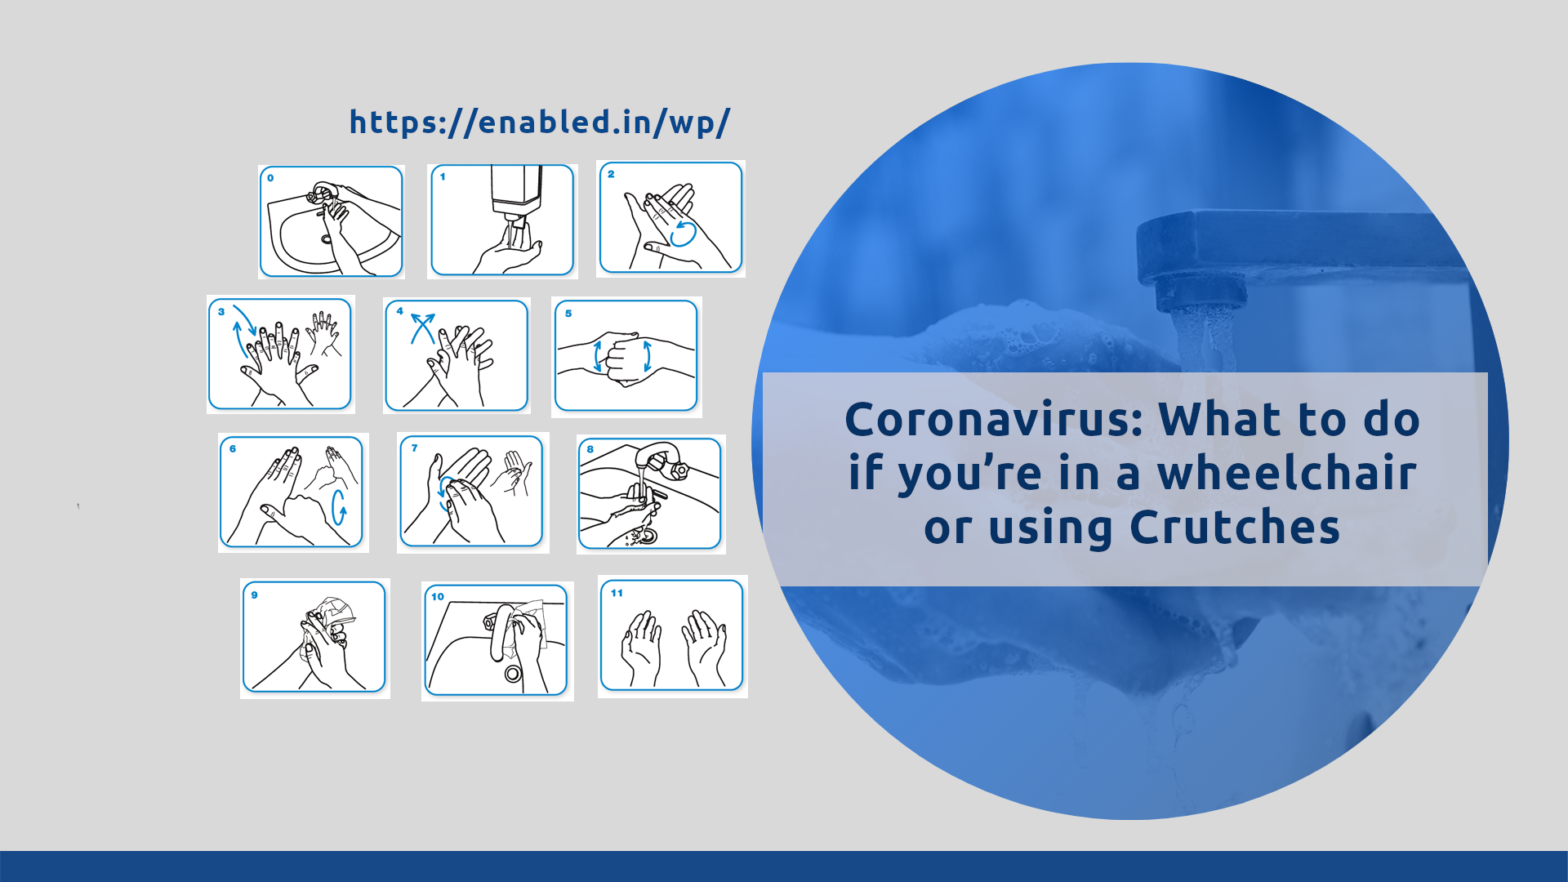 Clean hands protect against Corona Virus – Guidelines for Persons with Disabilities